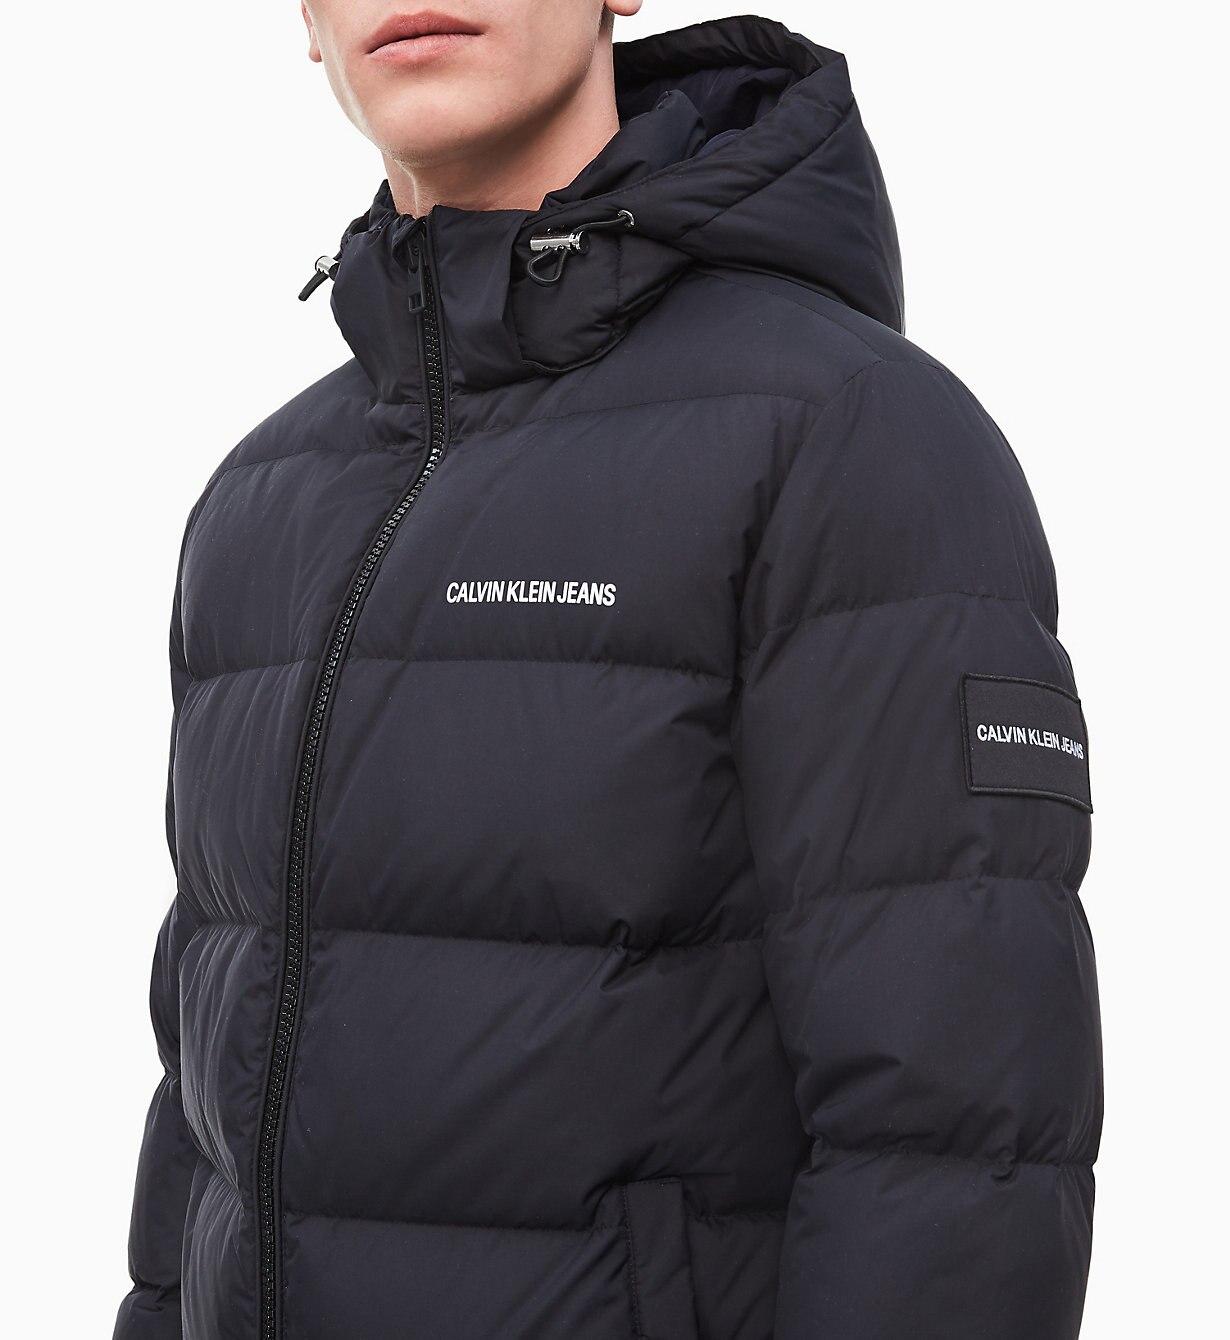 Calvin Klein Synthetic Hooded Down Puffer Jacket in Black for Men - Lyst